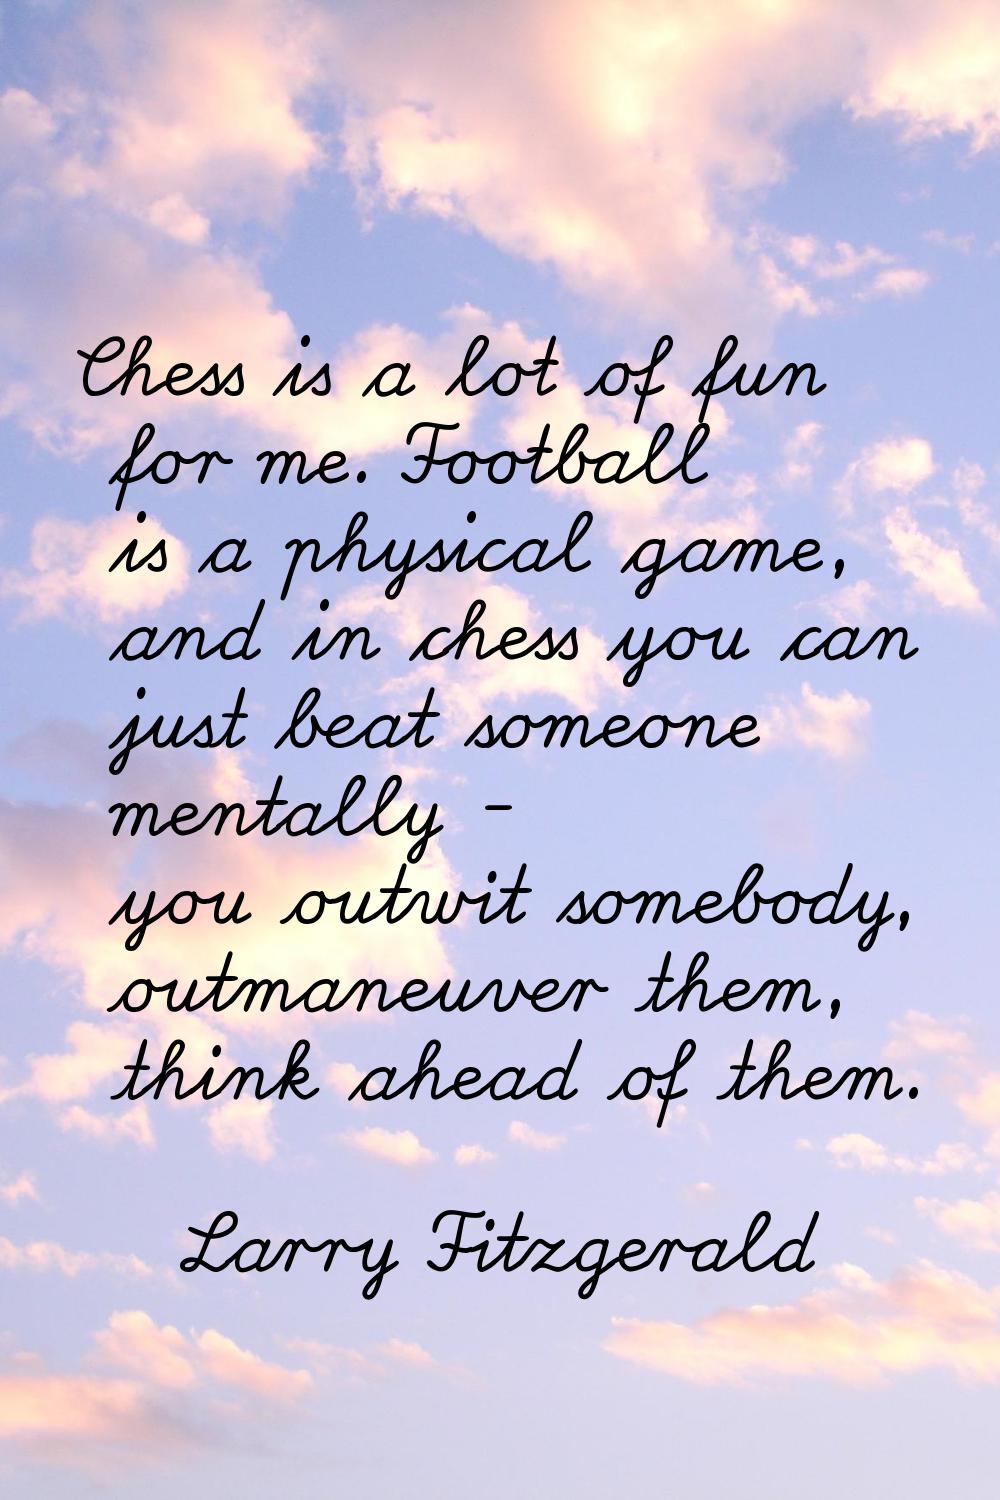 Chess is a lot of fun for me. Football is a physical game, and in chess you can just beat someone m